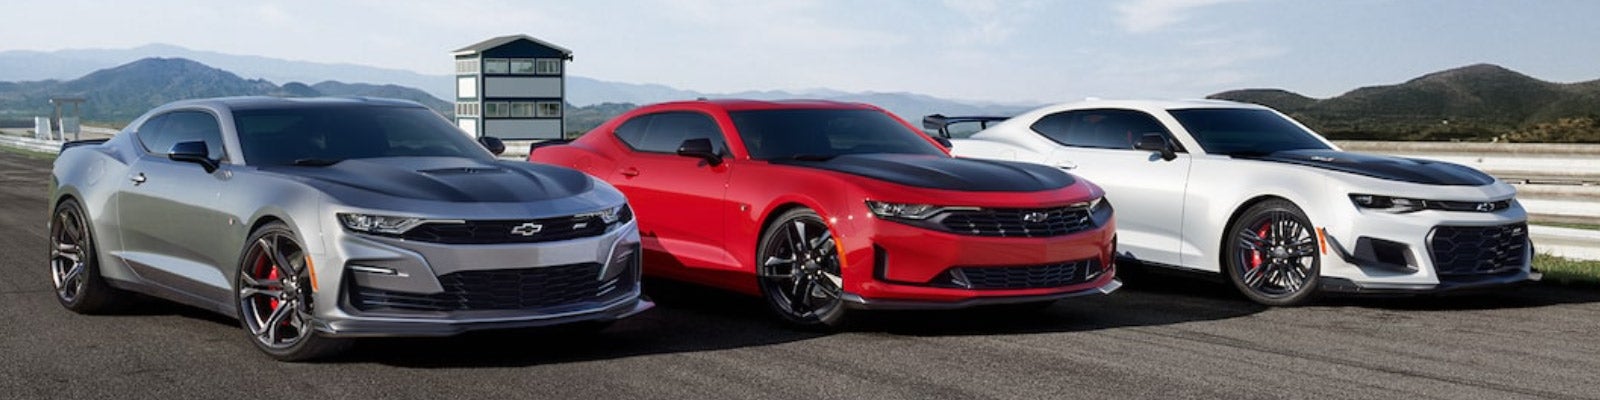 2021 Chevy Camaro SS ZL1 Cant Be Sold in California Washington